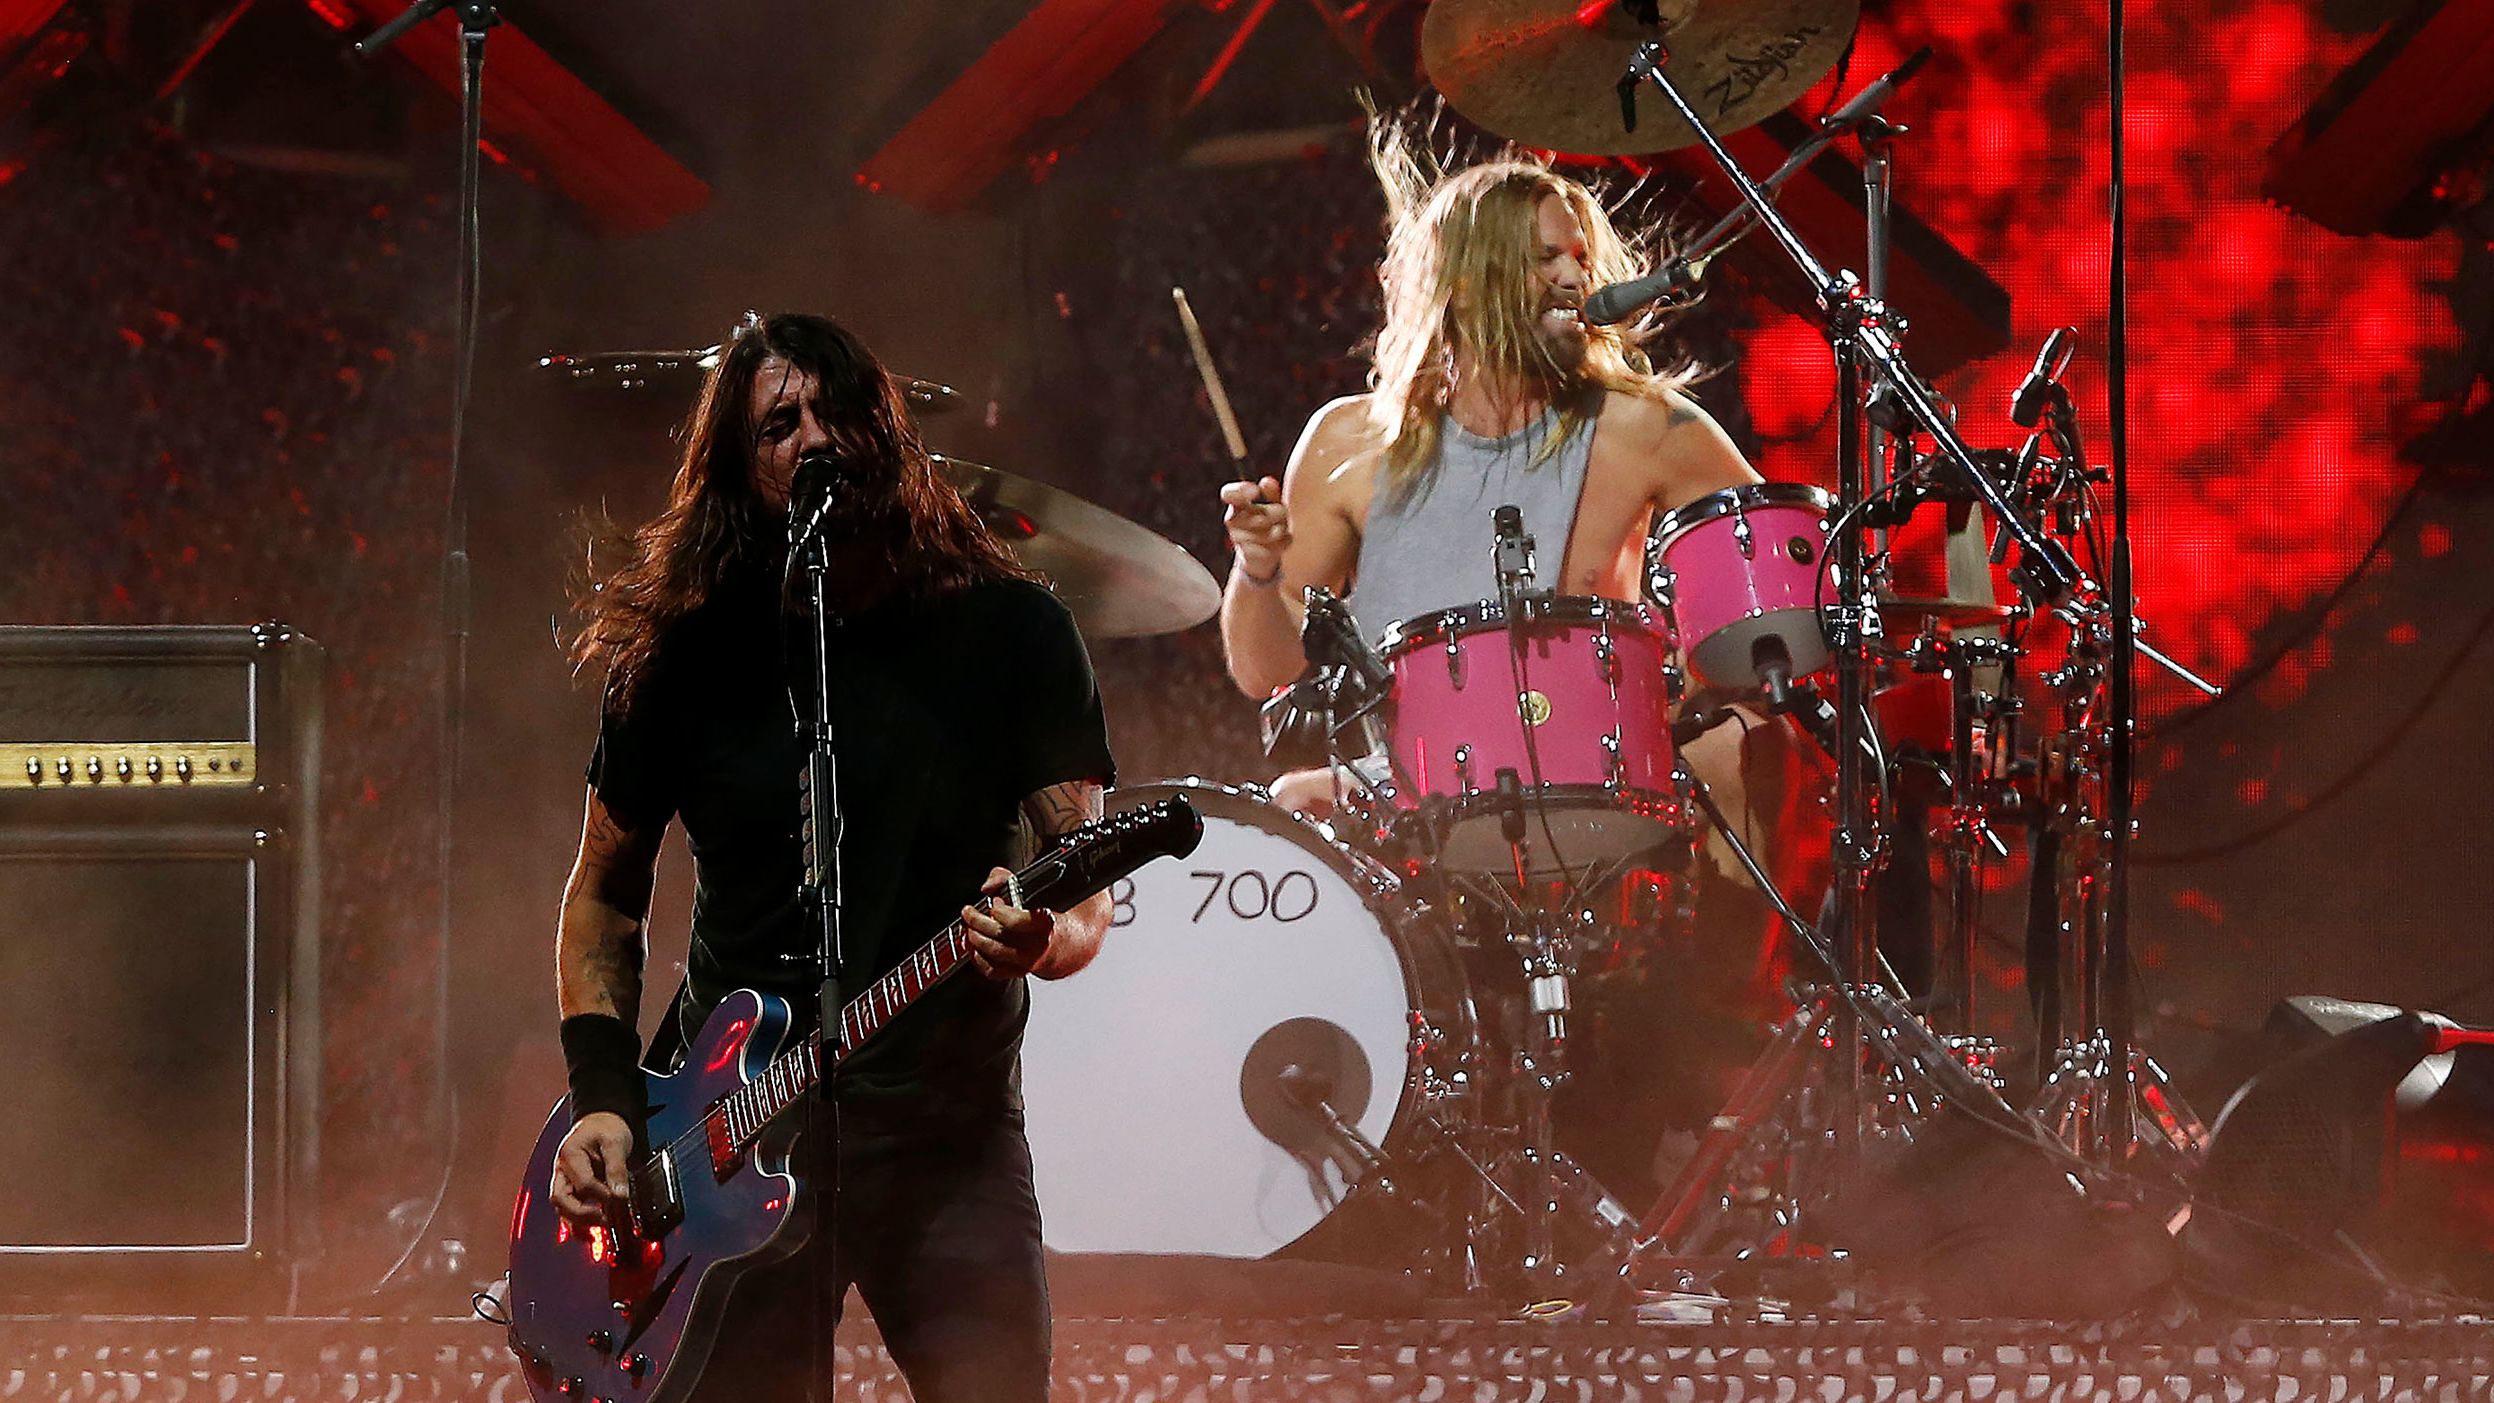 Dave Grohl and Taylor Hawkins of Foo Fighters perform during Day 3 of Lollapalooza Chile 2022 at Parque Bicentenario Cerrillos in Santiago.